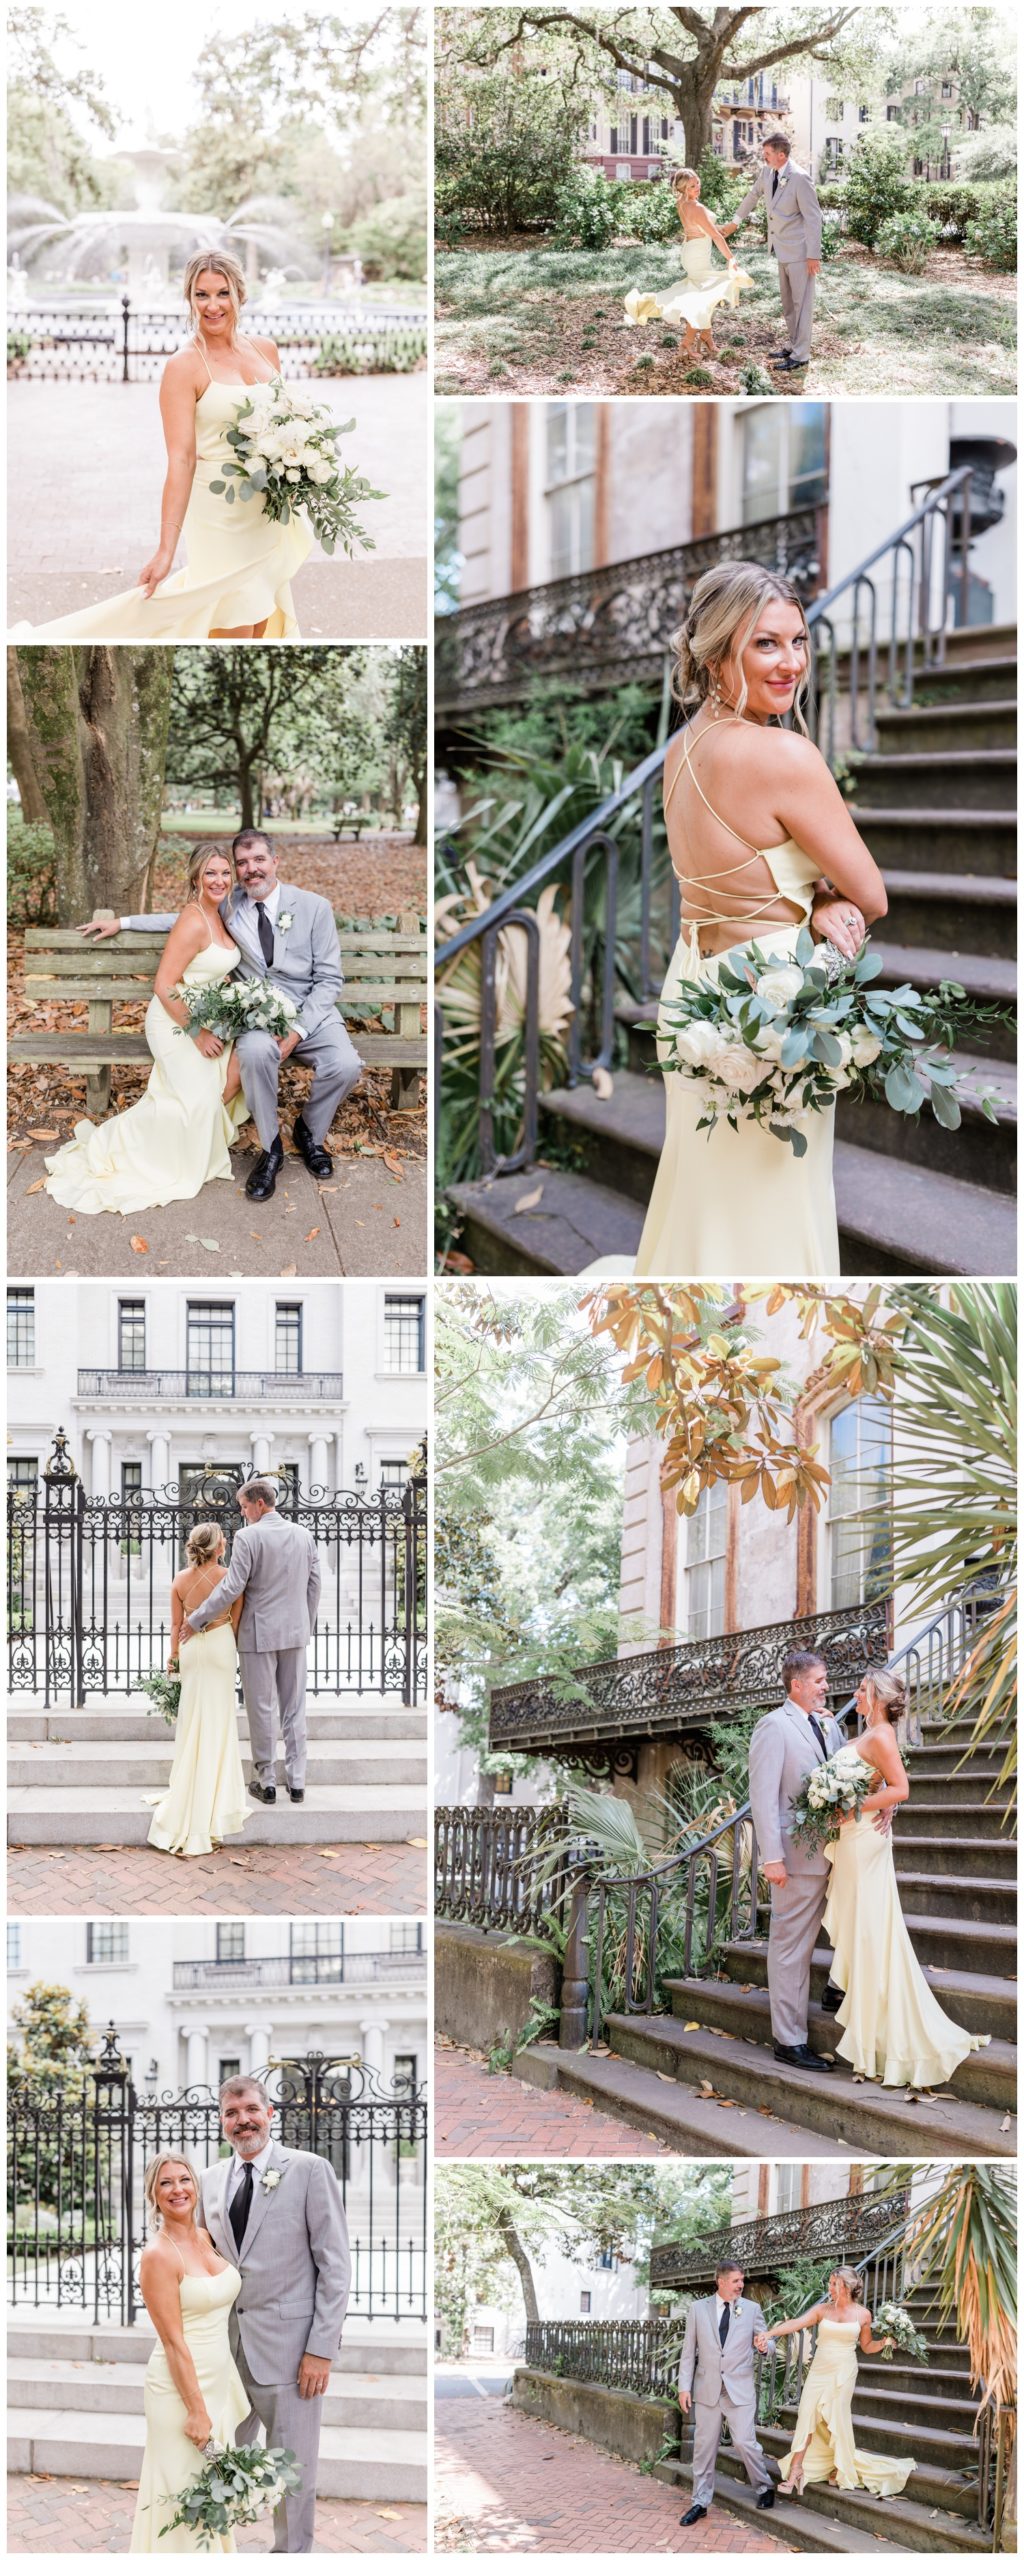 A Whimsical Forsyth Park Elopement - apt b photography - ivory and beau florals, makeup by royal makeup and hair